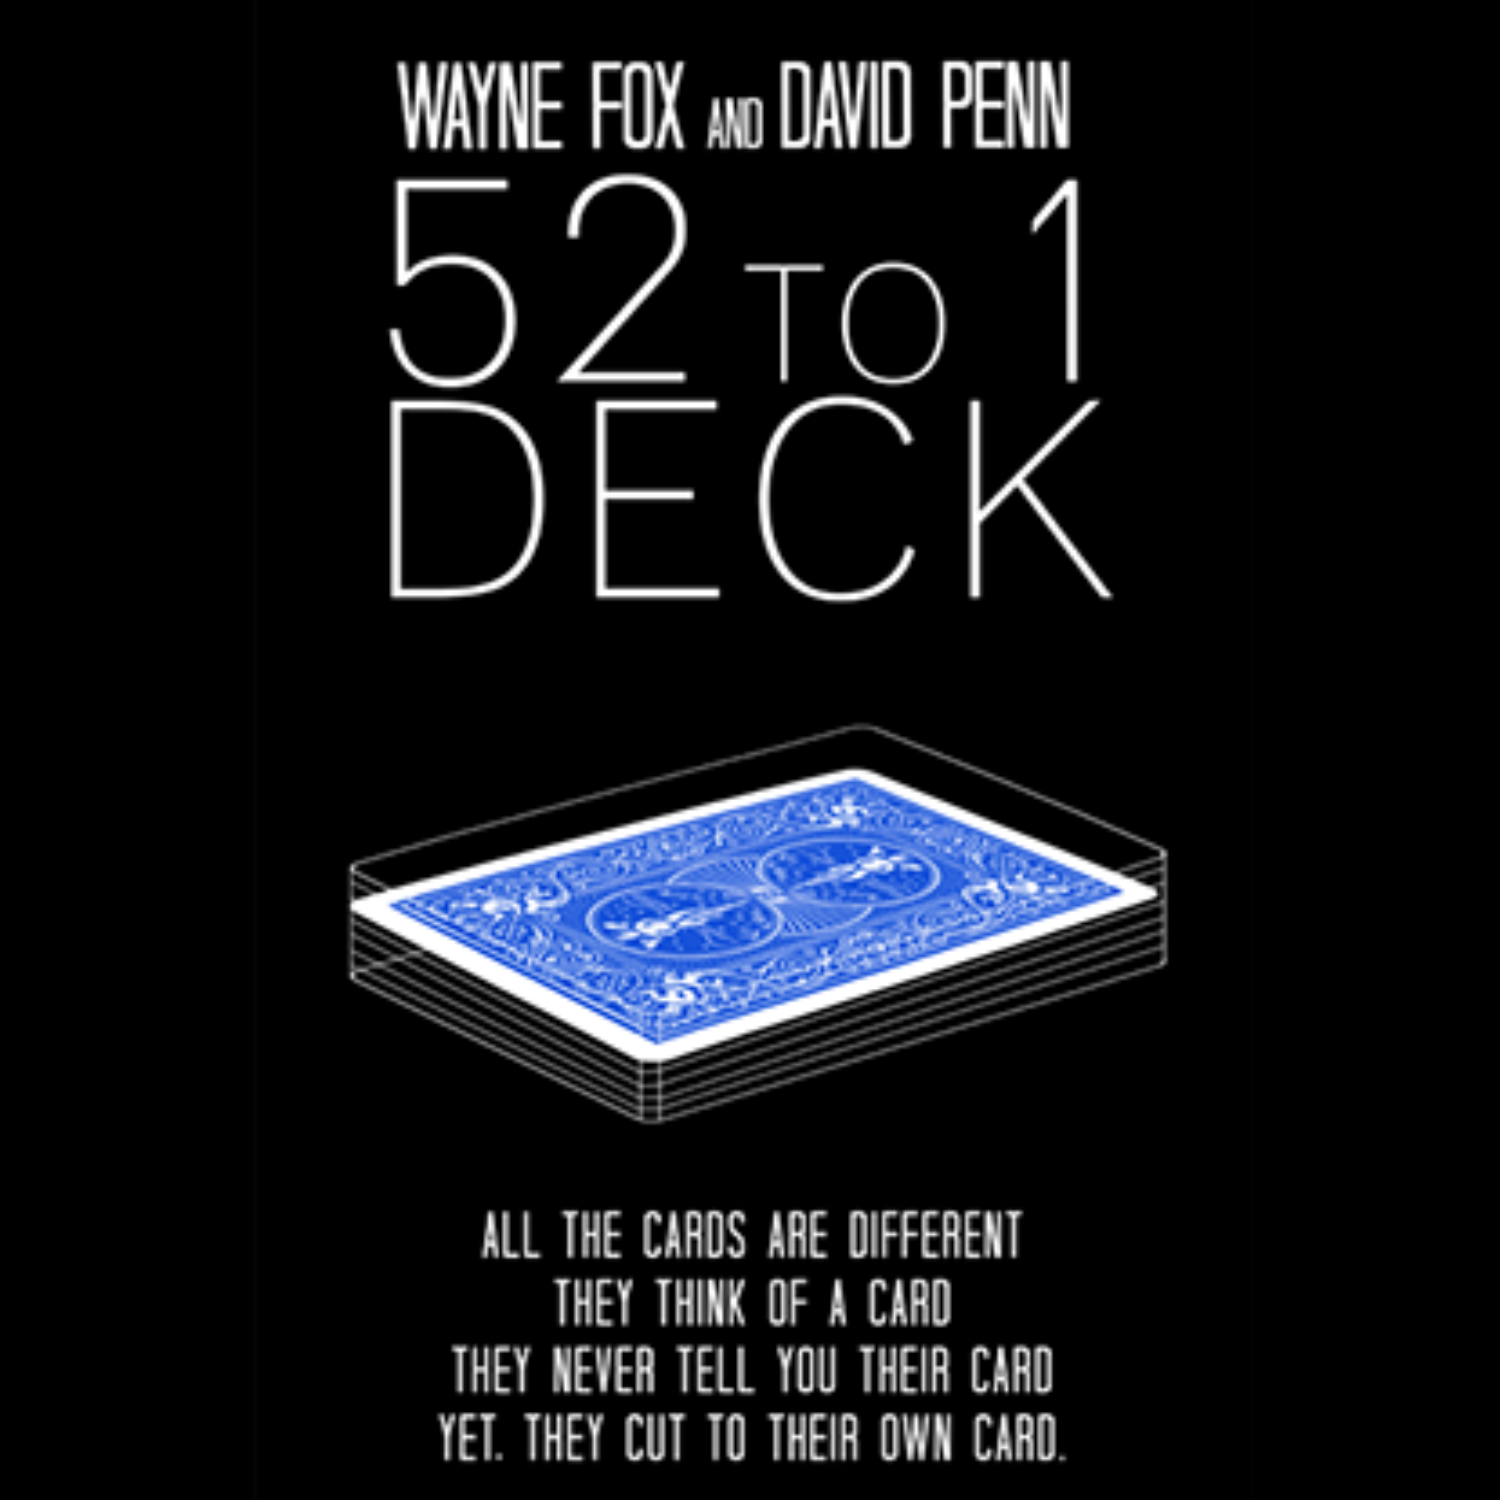 The 52 to 1 Deck